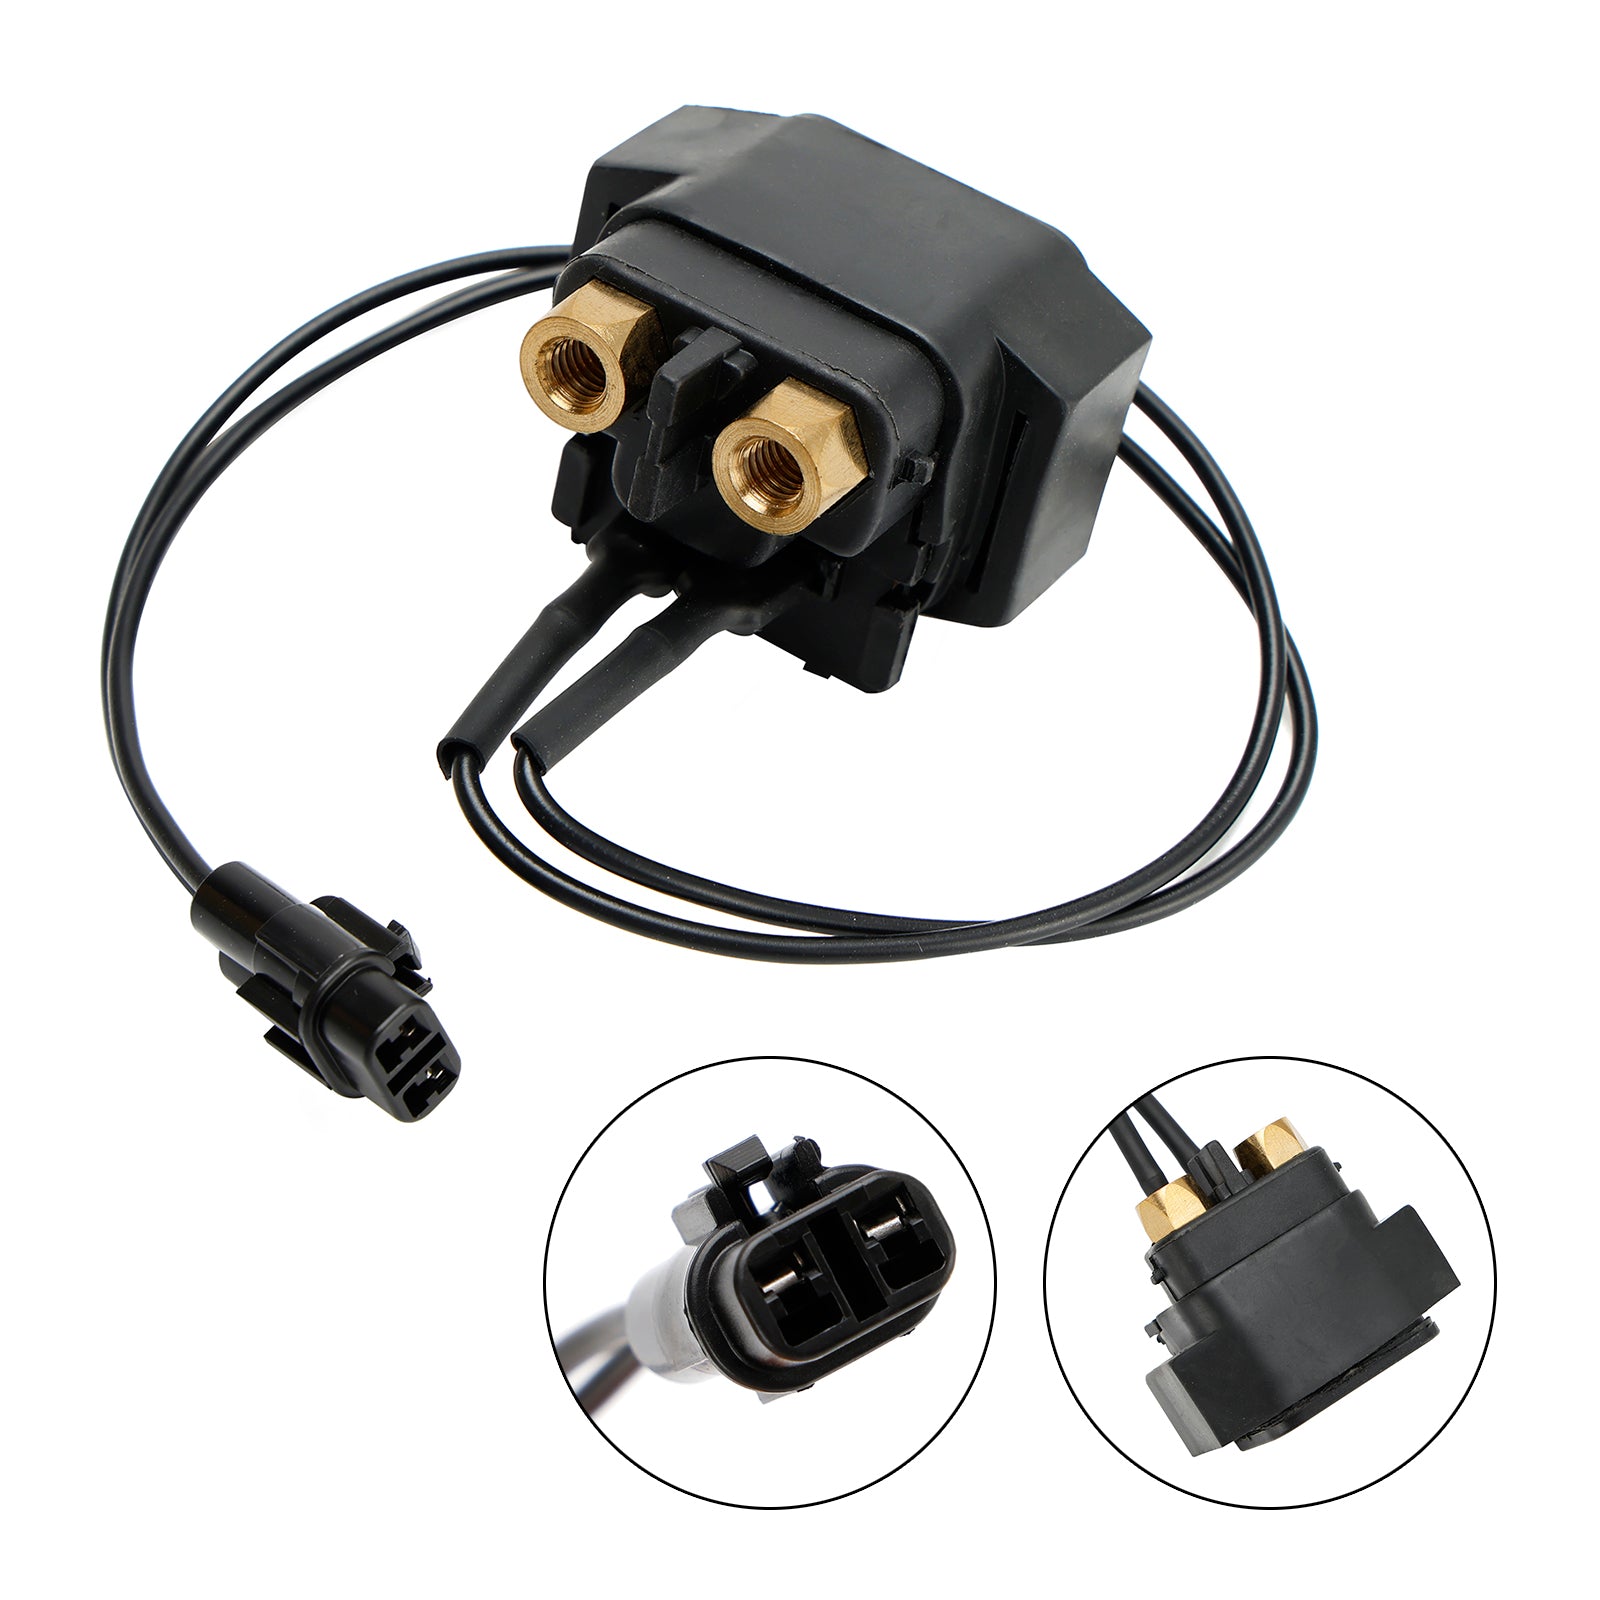 Starter Solenoid Relay fit for Yamaha XJR1300 07-2016 YFM 600 Grizzly 1999-2001